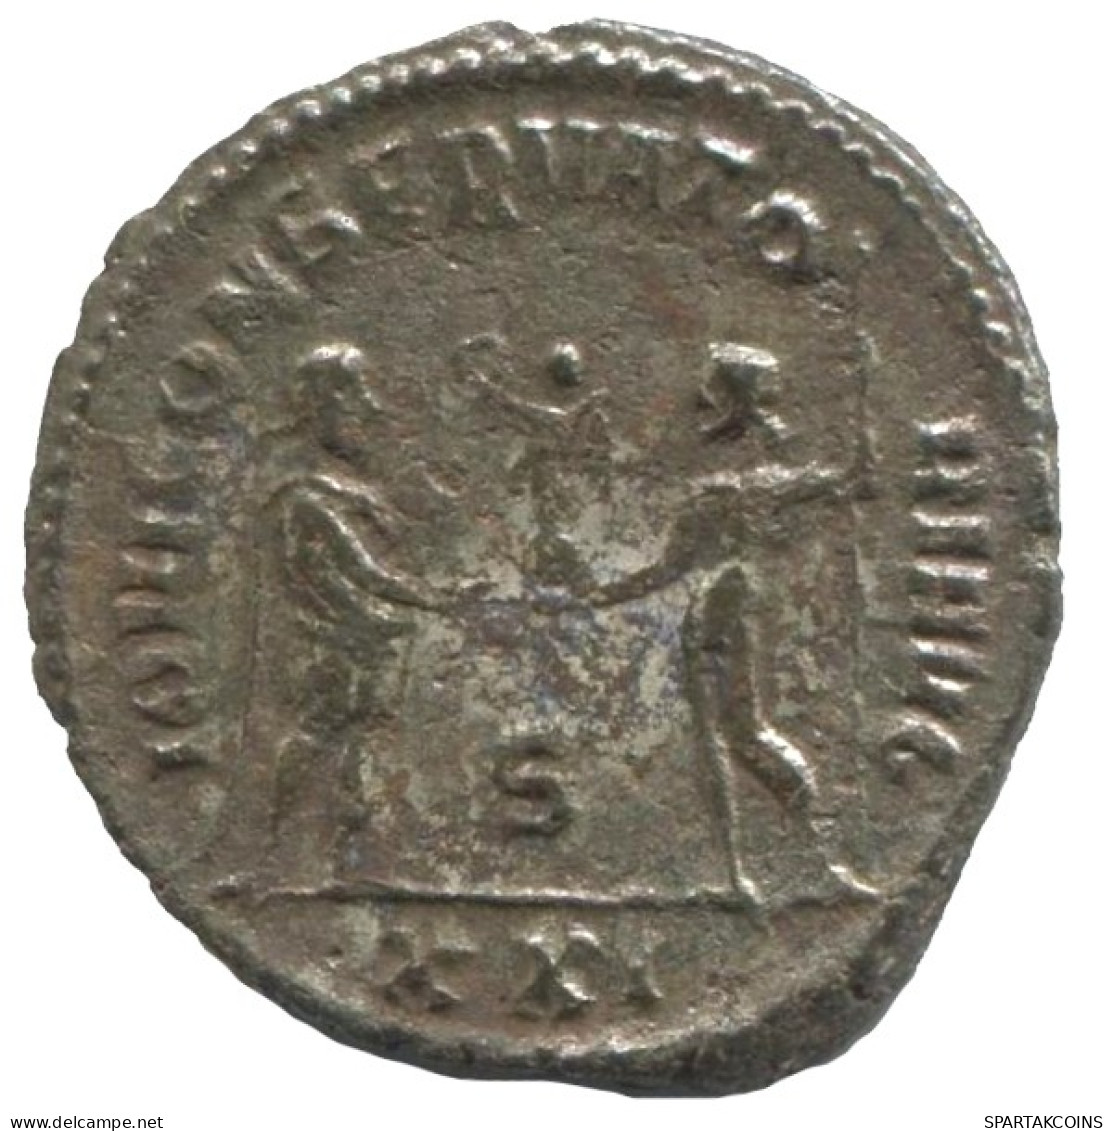 DIOCLETIAN ANTONINIANUS Antioch (S/XXI) AD287 IOVICONSERVATORIAVG #ANT1863.48.E.A - The Tetrarchy (284 AD Tot 307 AD)